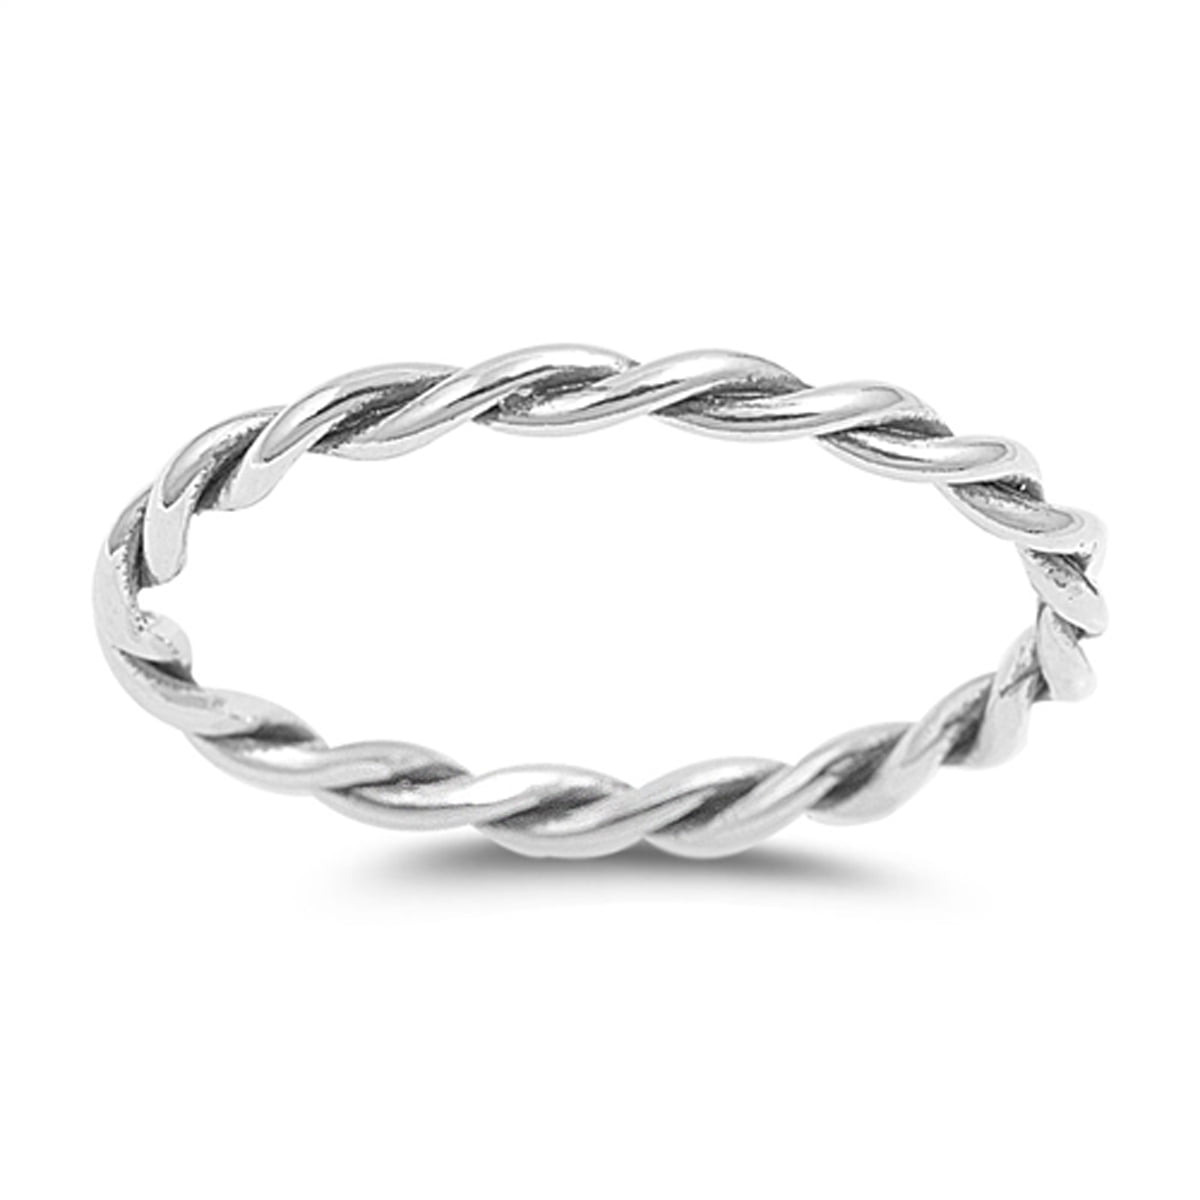 Thin Wave Knot Twist Midi Dainty Ring New .925 Sterling Silver Band Sizes 4-10 